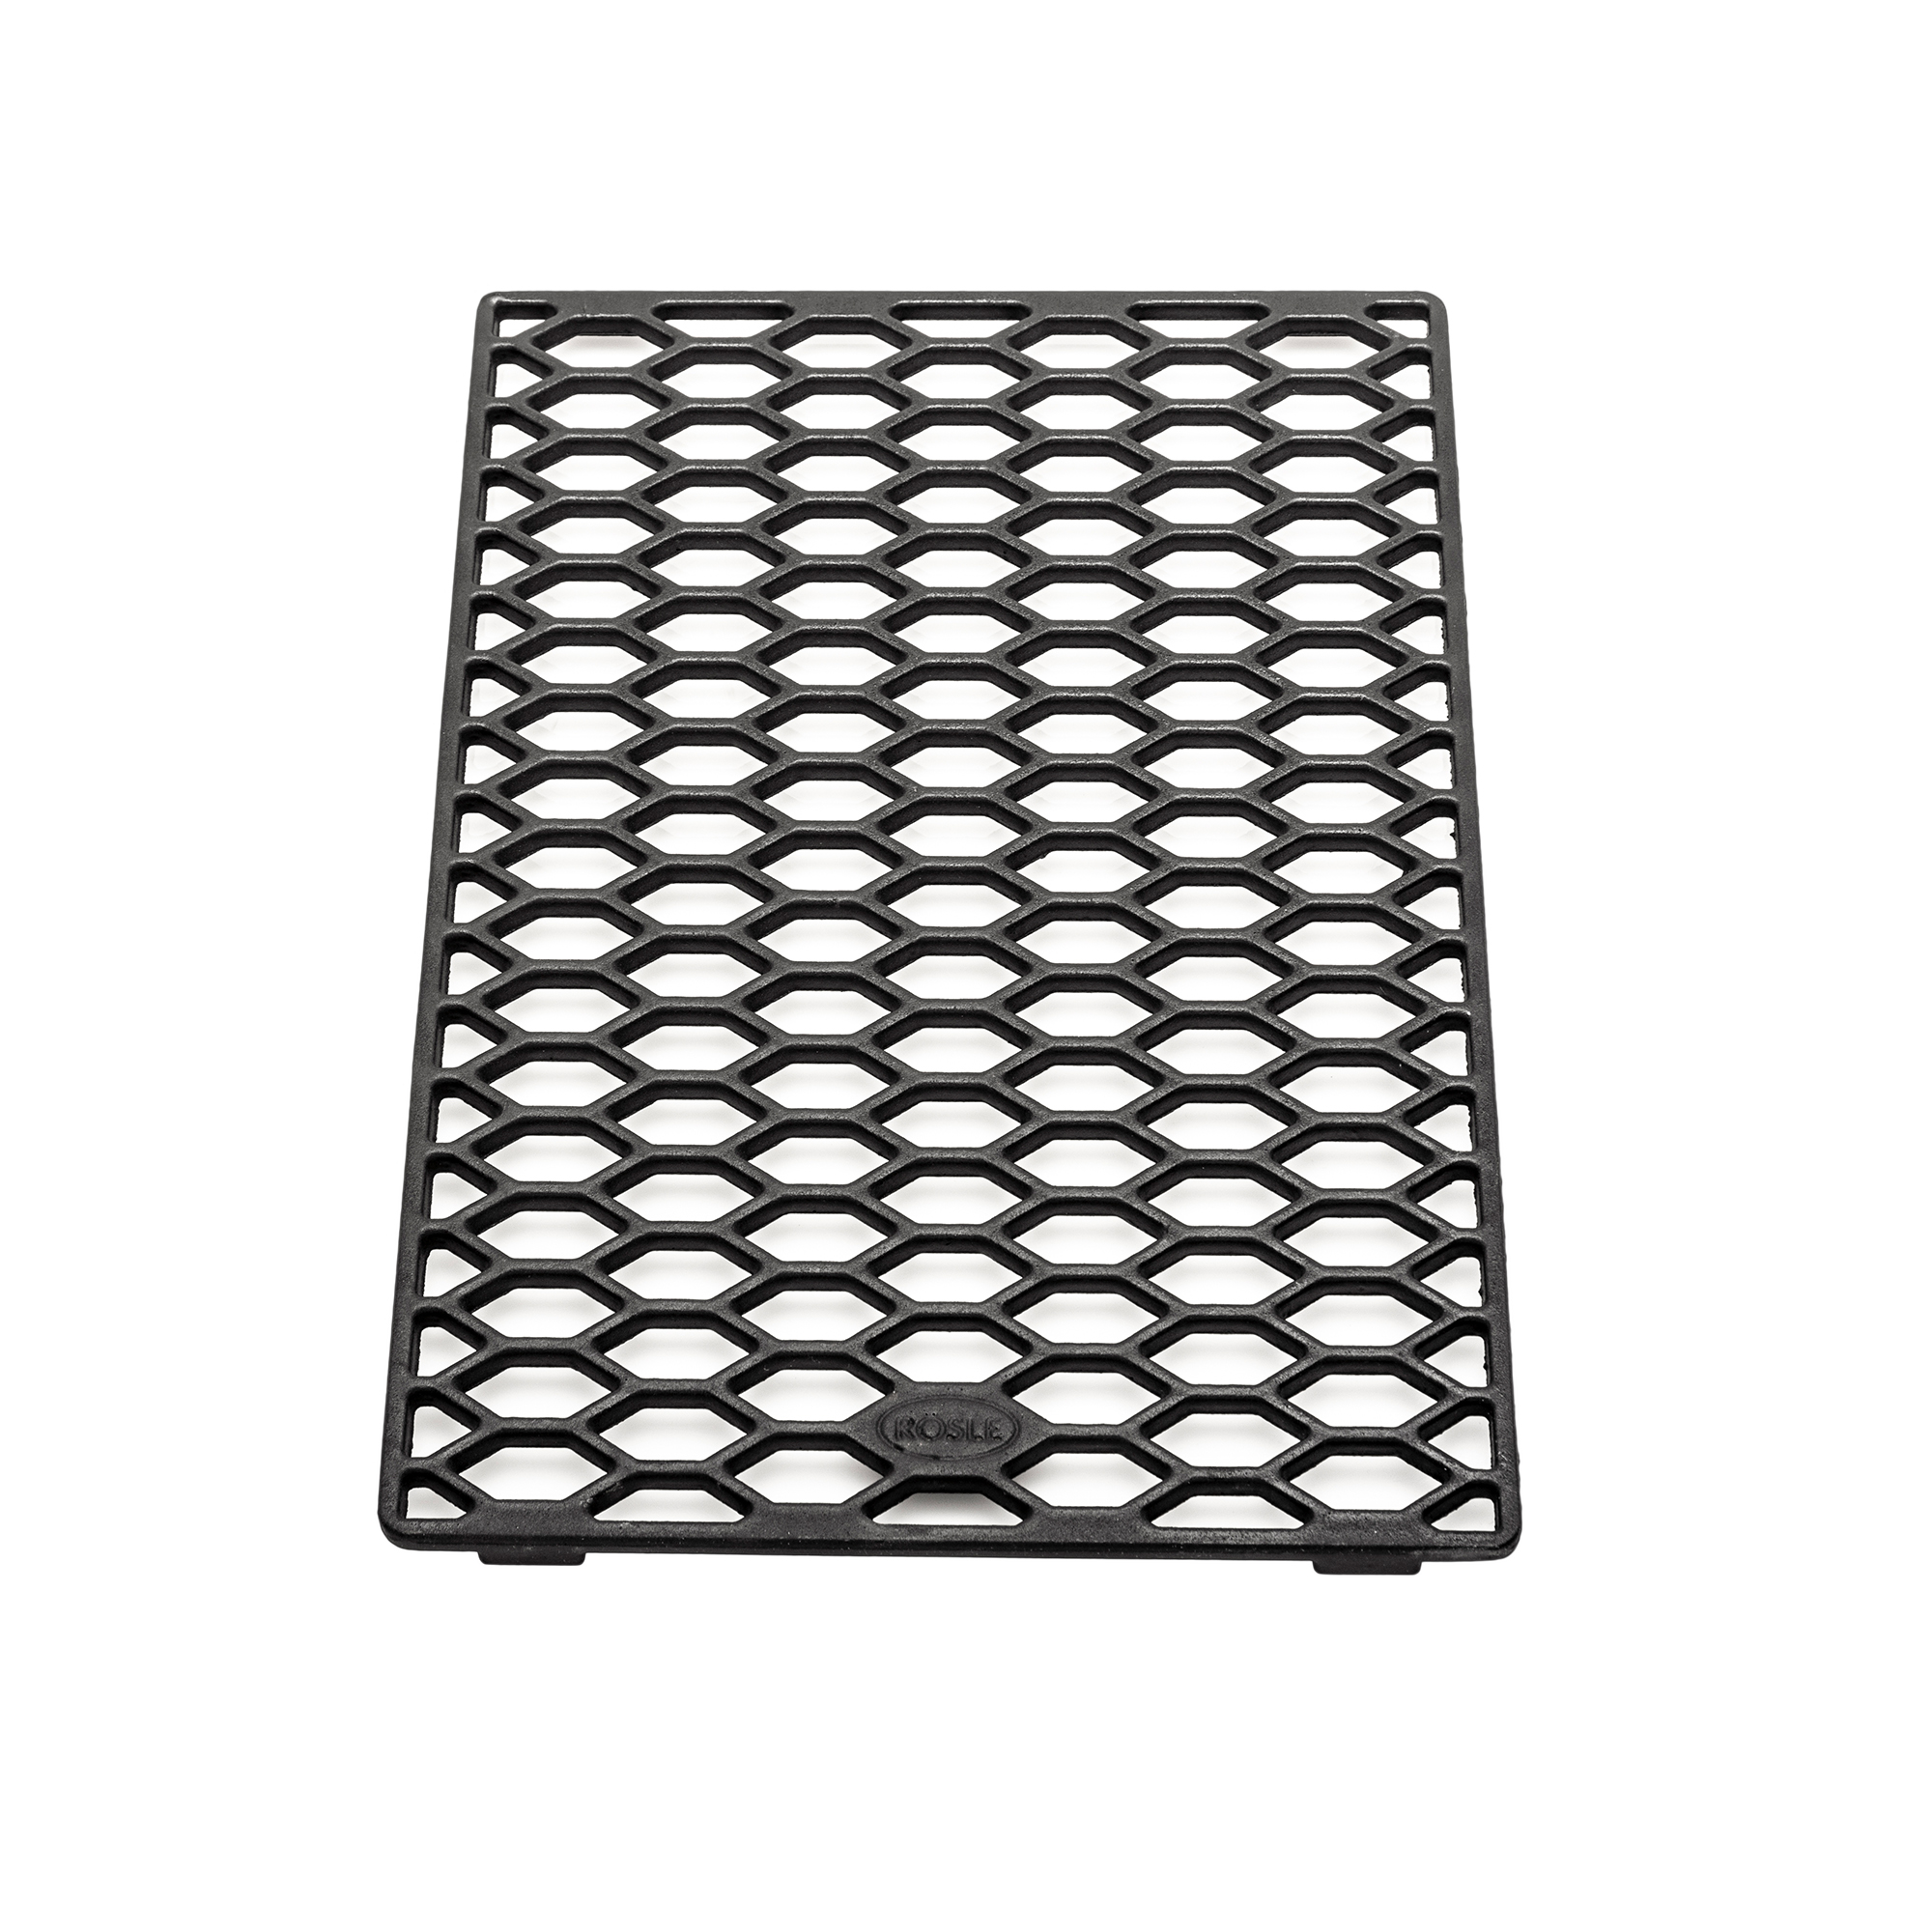 Cast iron grilling grate (Vision G3)